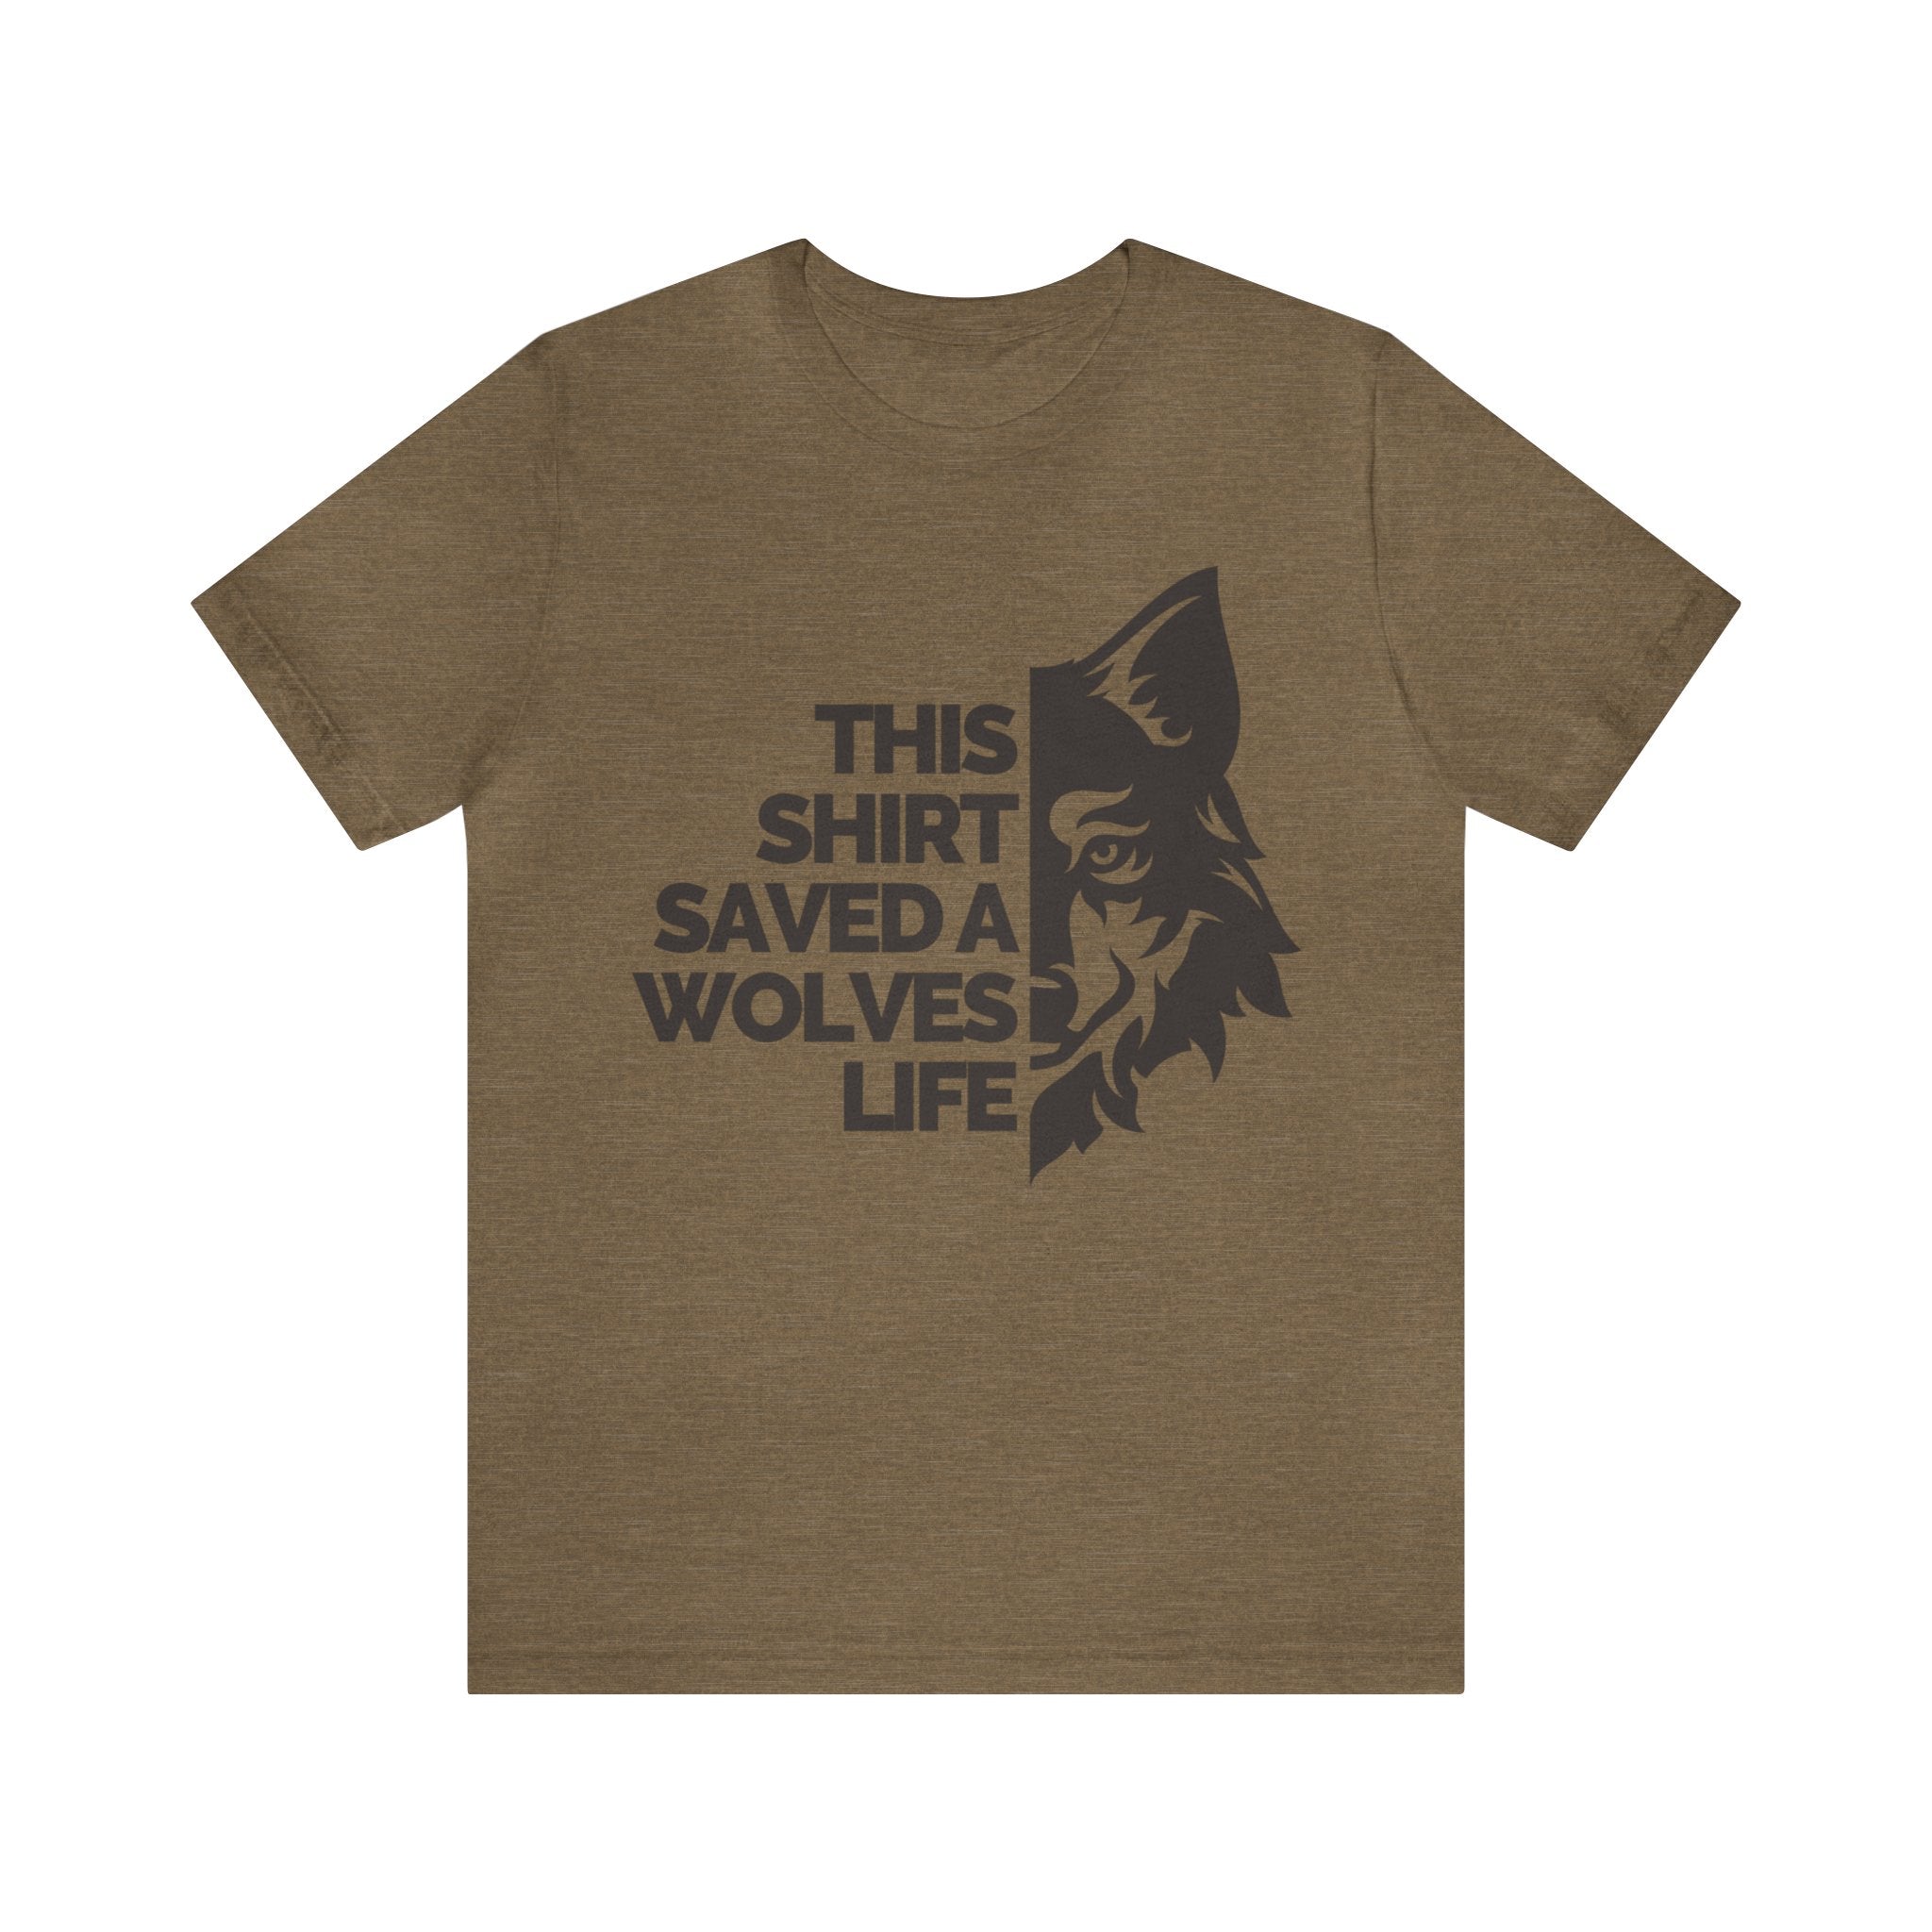 This Shirt Saved A Wolve's Life -